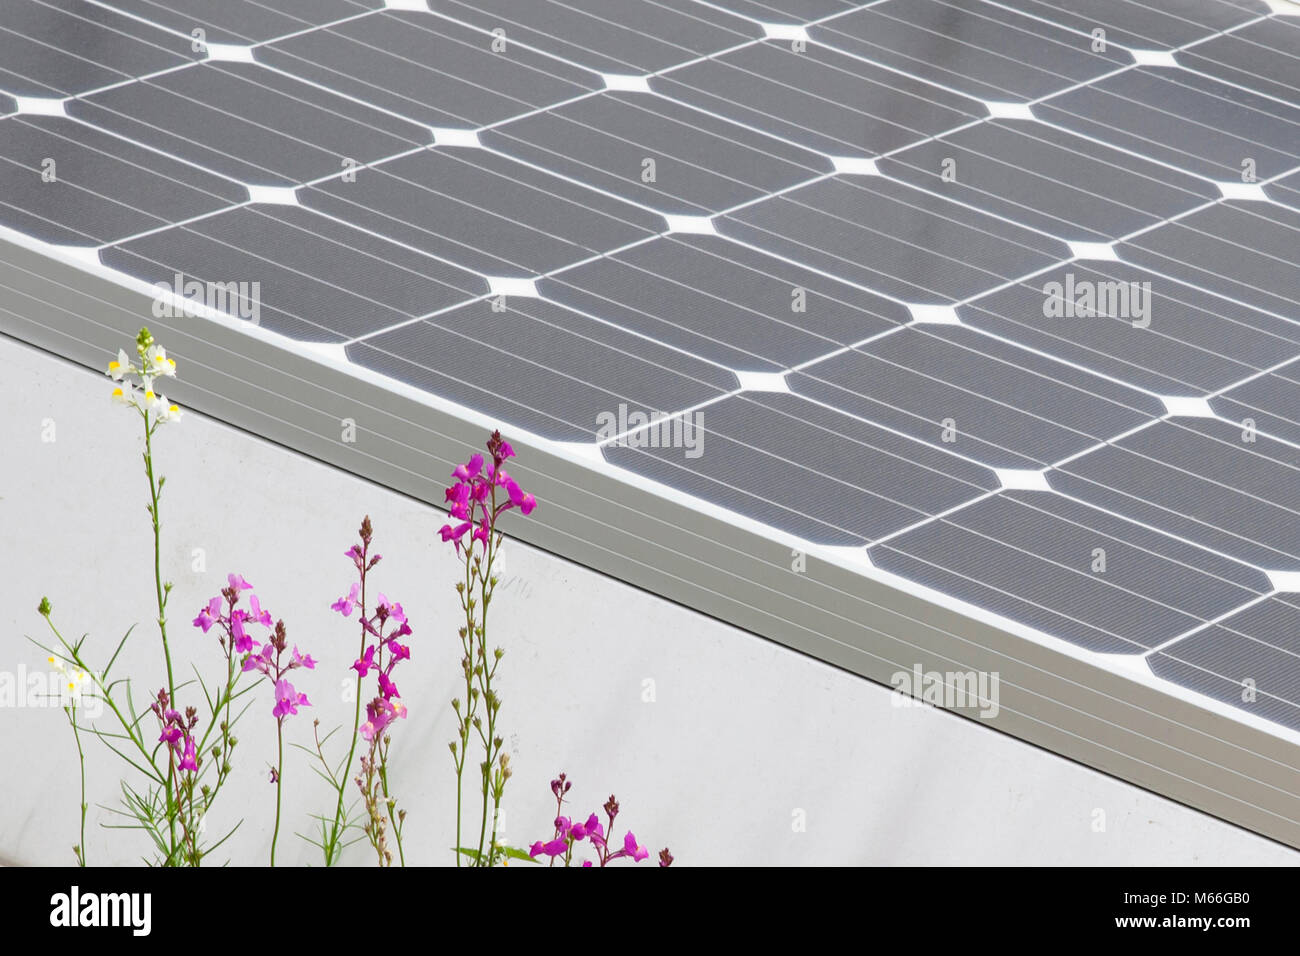 solar energy roof panel with colourful flowers in the foreground green energy Stock Photo